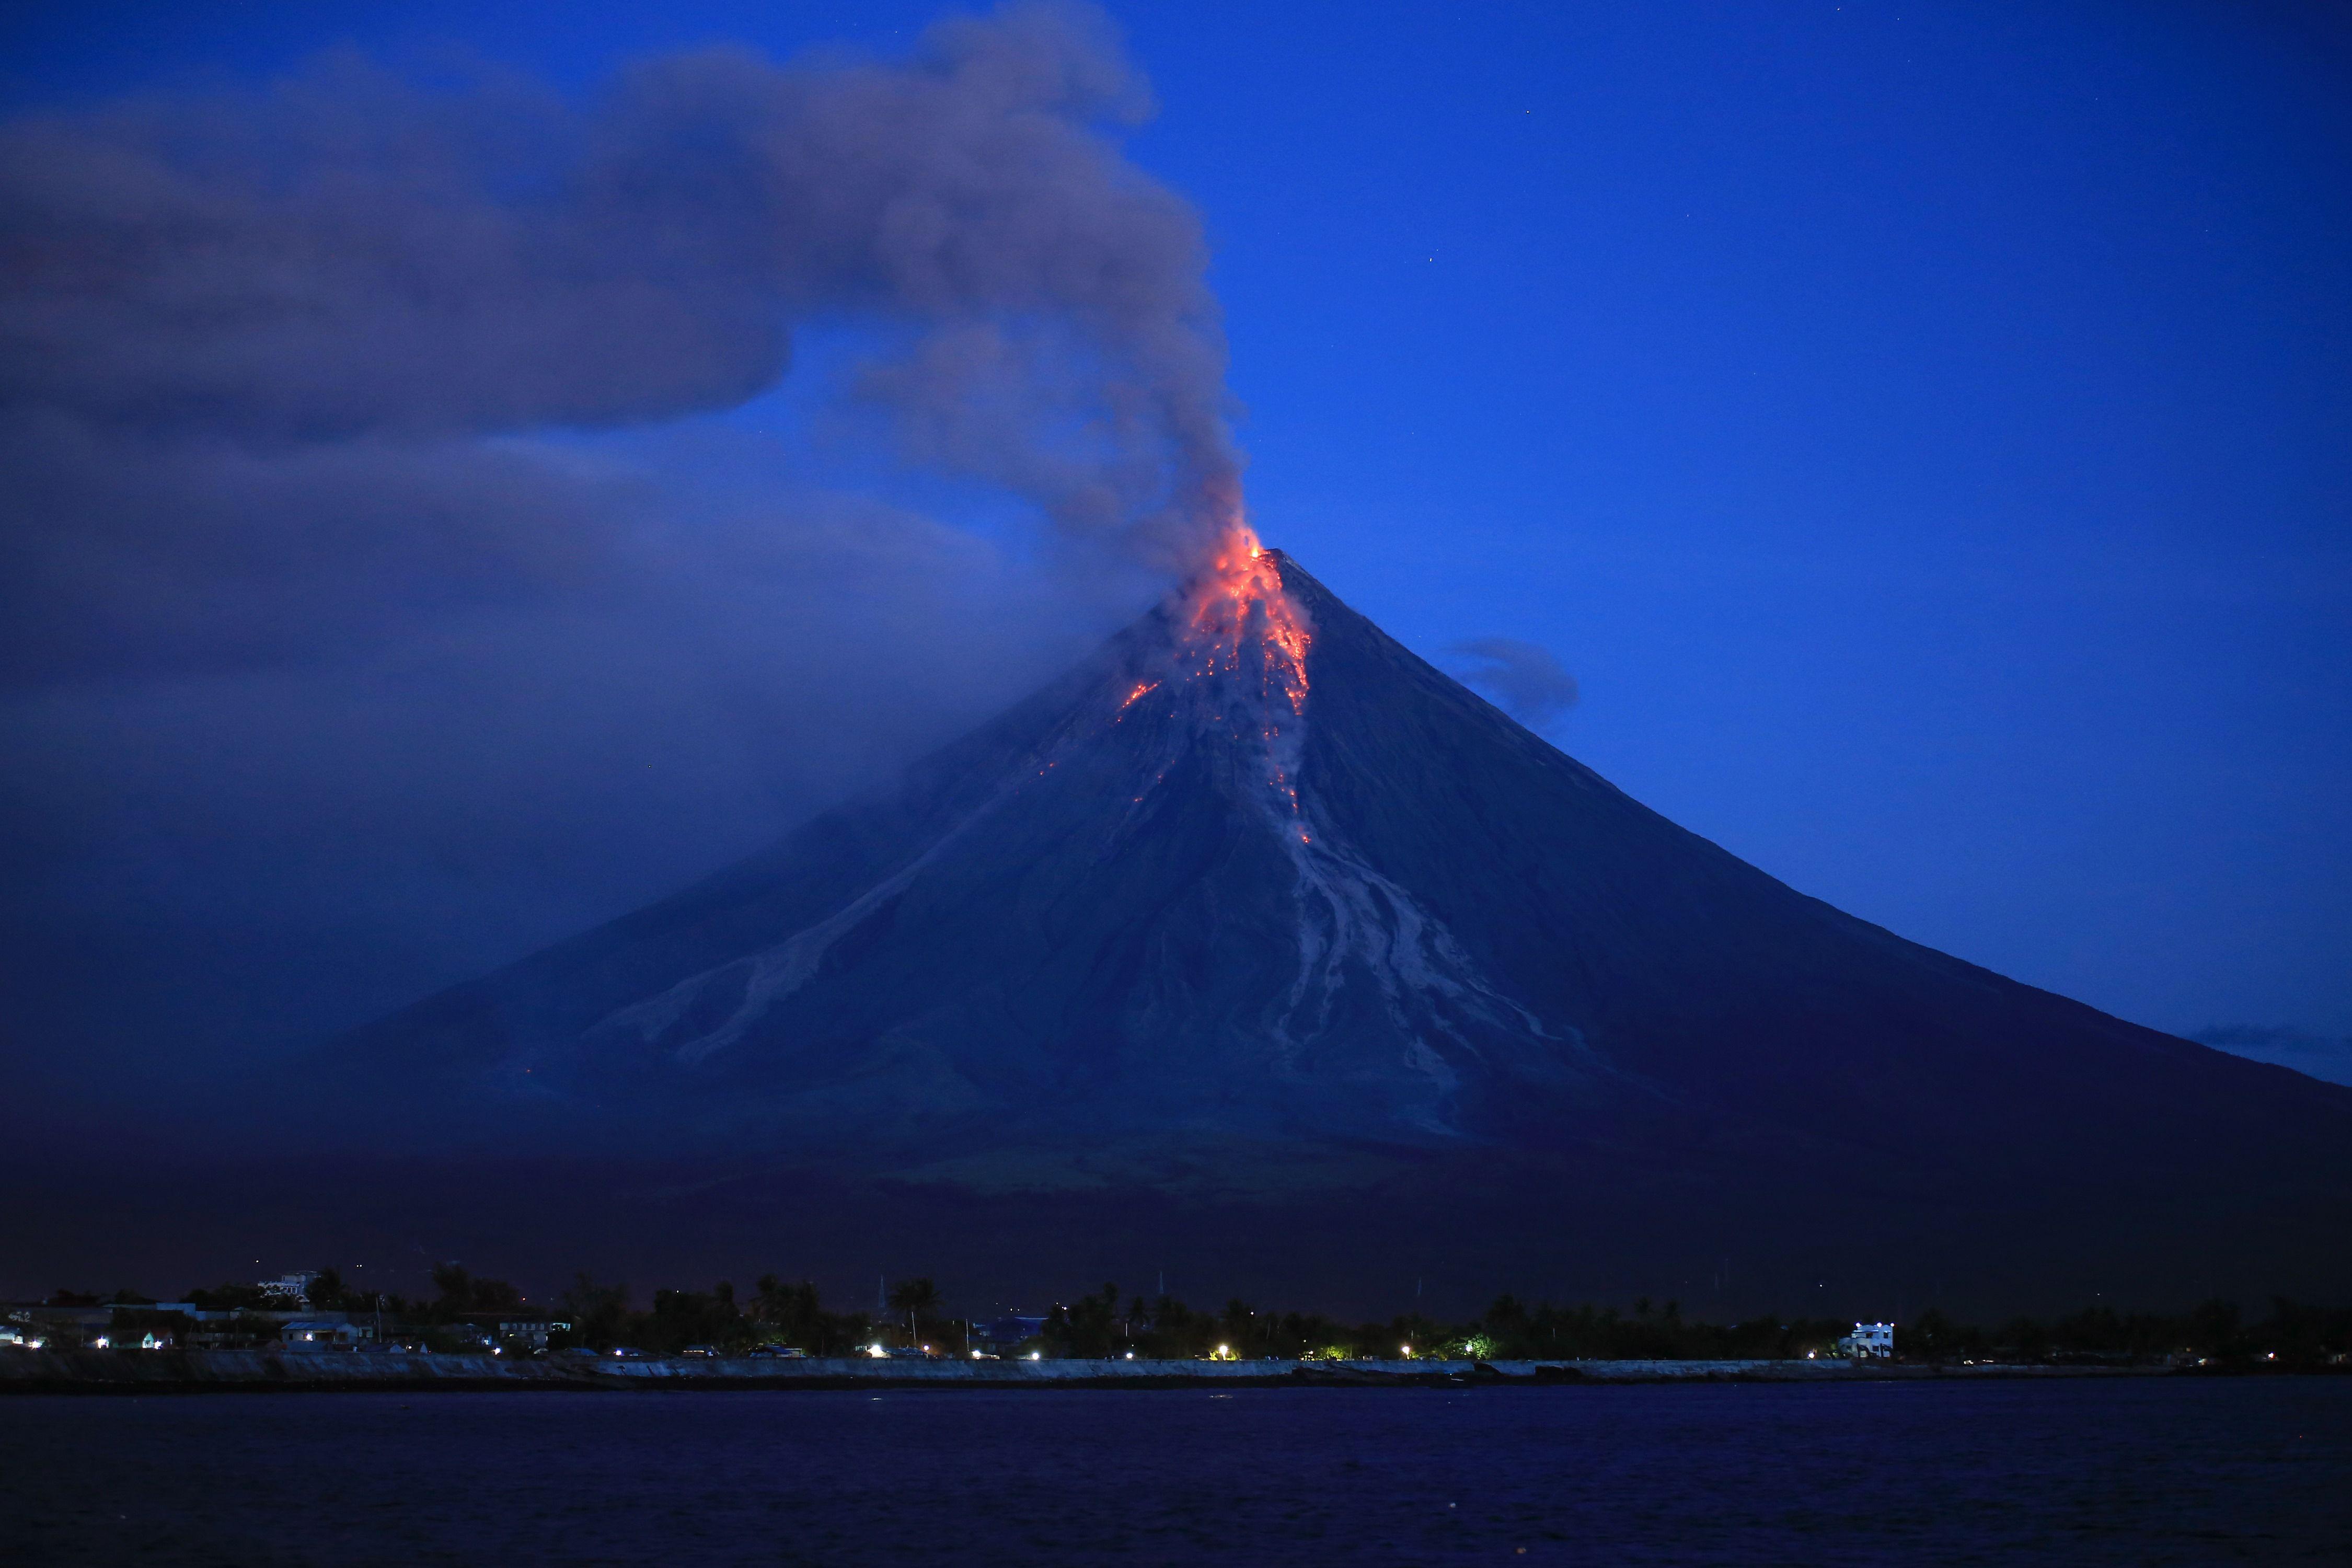 Philippines Mayon volcano forces more evacuations as lava shoots